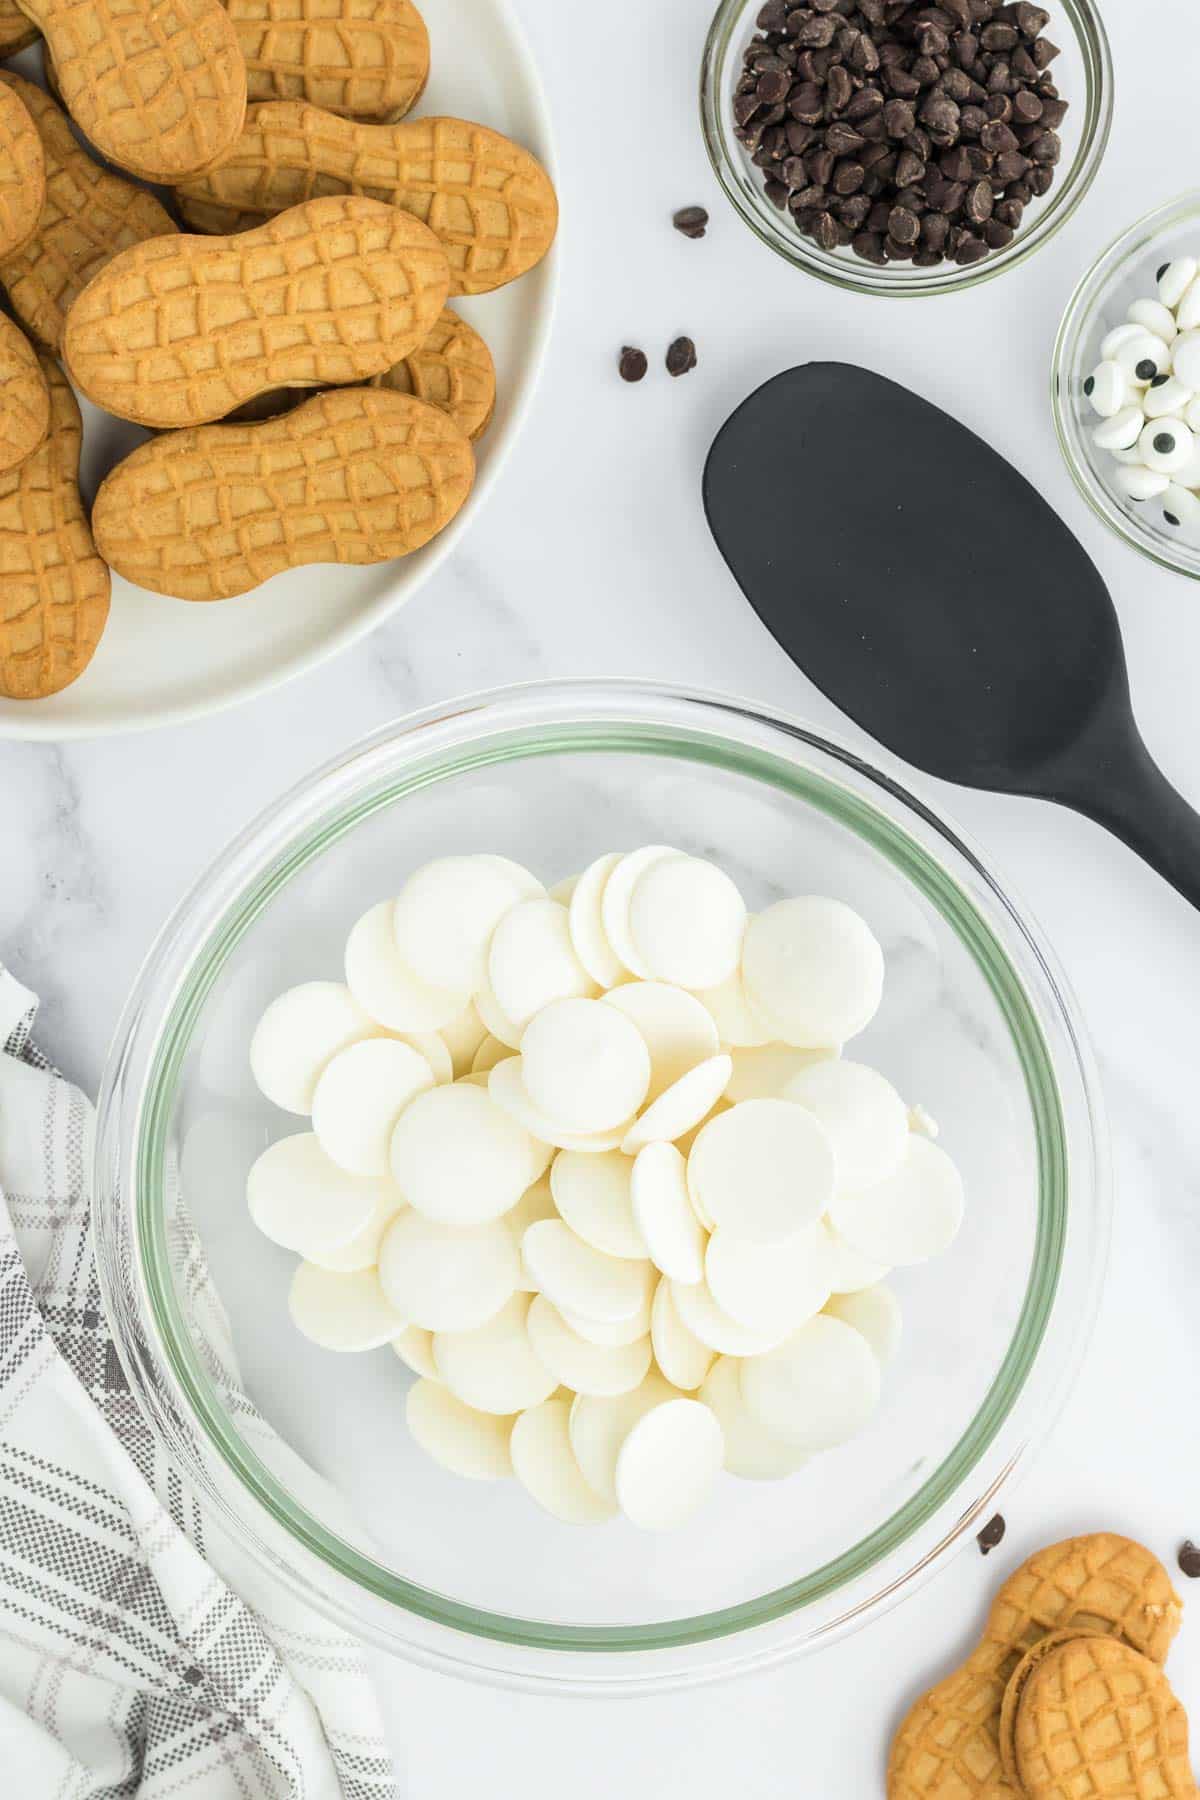 A bowl of white candy melts in a glass mixing bowl surrounded by peanut butter cookies, chocolate chips and a spoon on a marble counter.